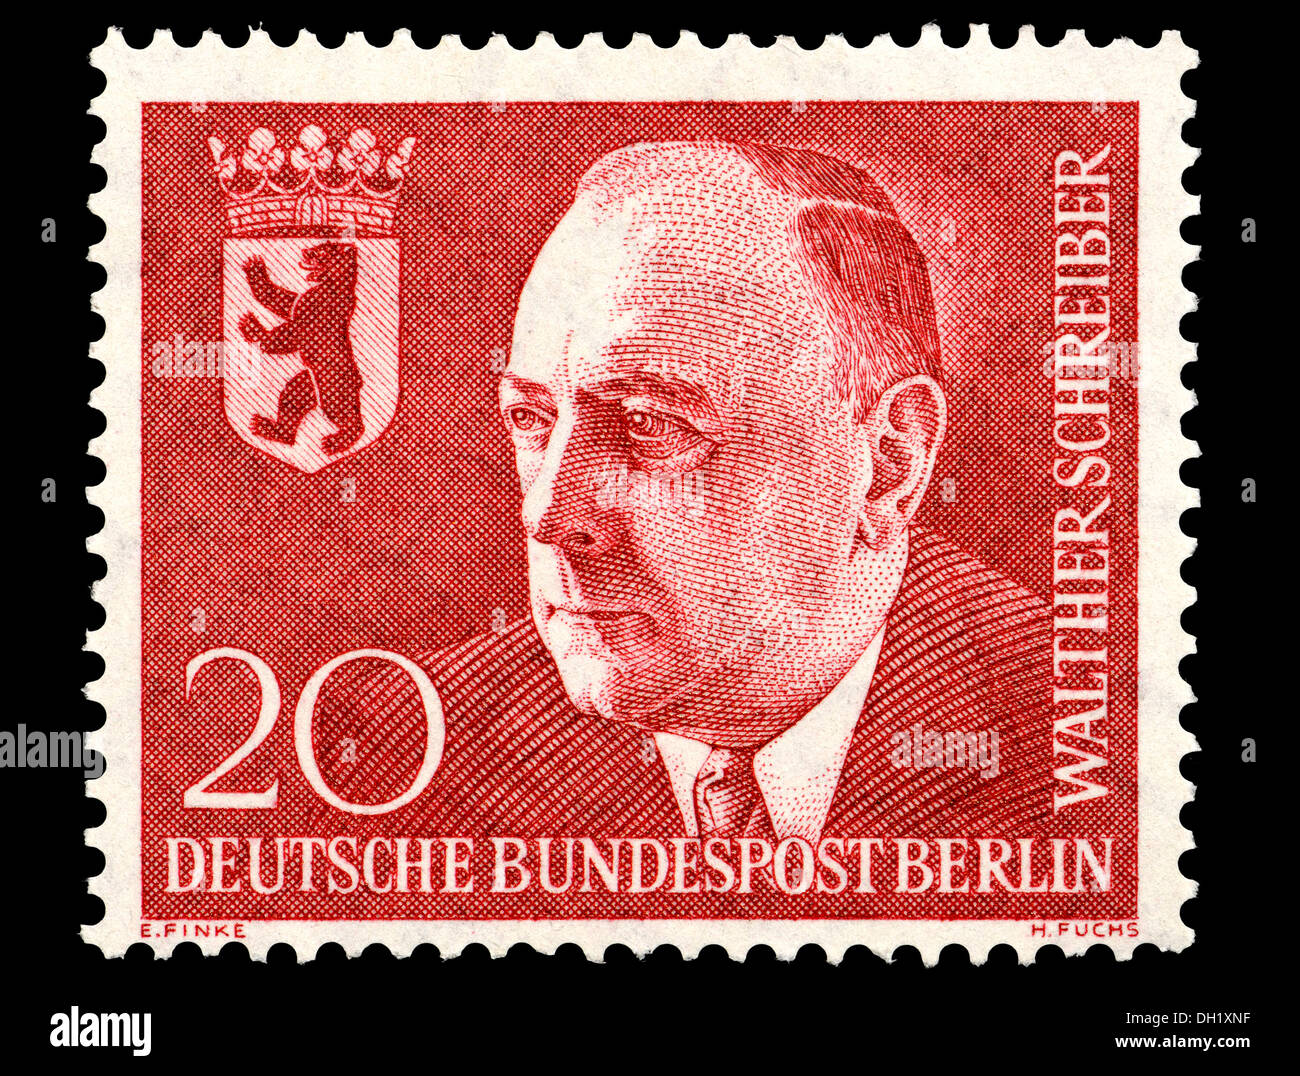 Portrait of Walther Carl Rudolf Schreiber (1884-1958: German politician and mayor of Berlin) from German postage stamp. Stock Photo